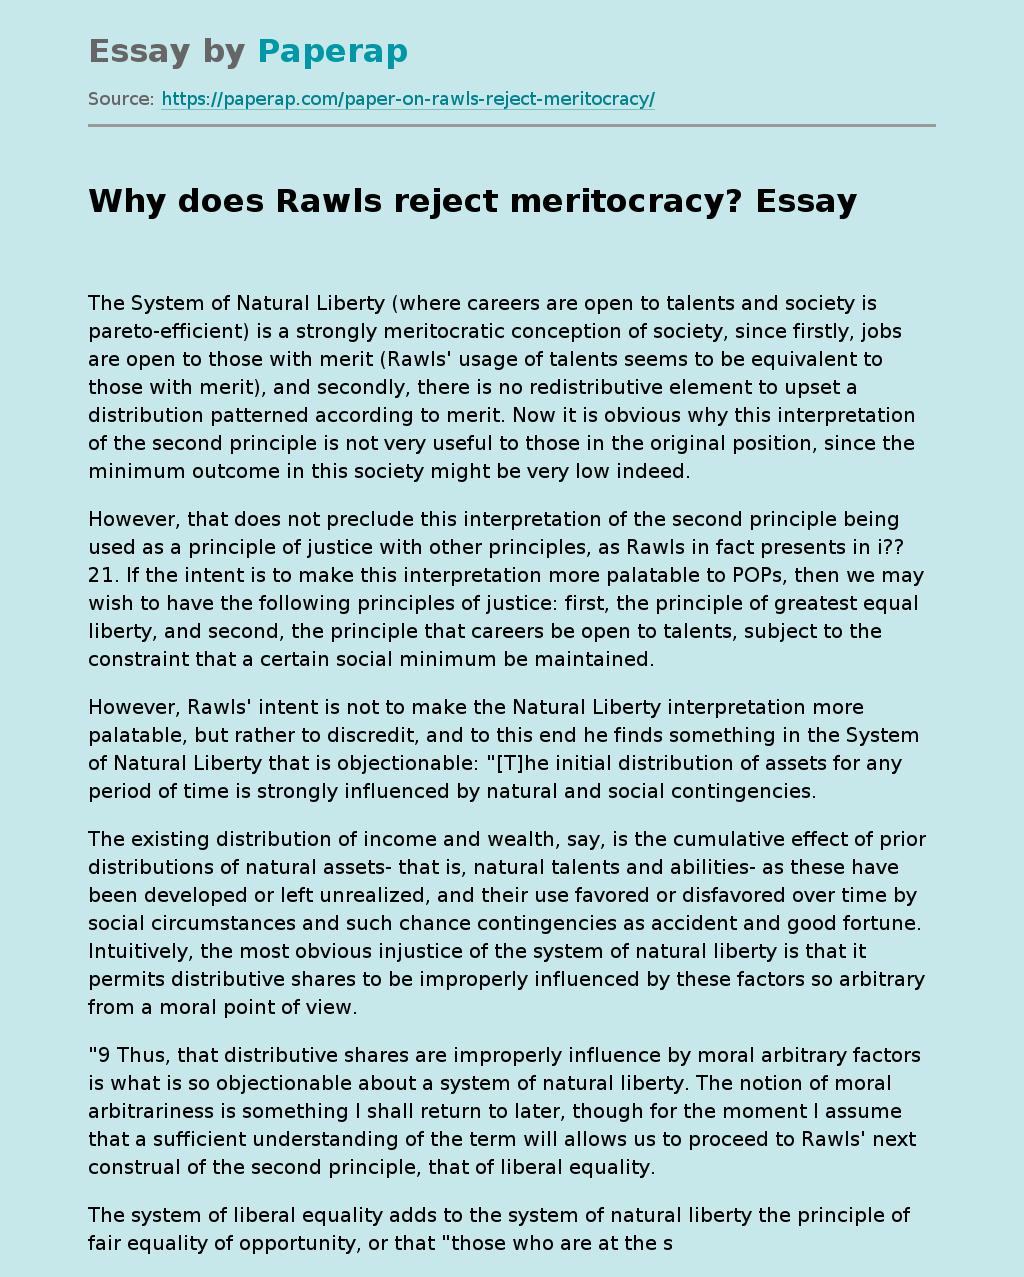 Why does Rawls reject meritocracy?